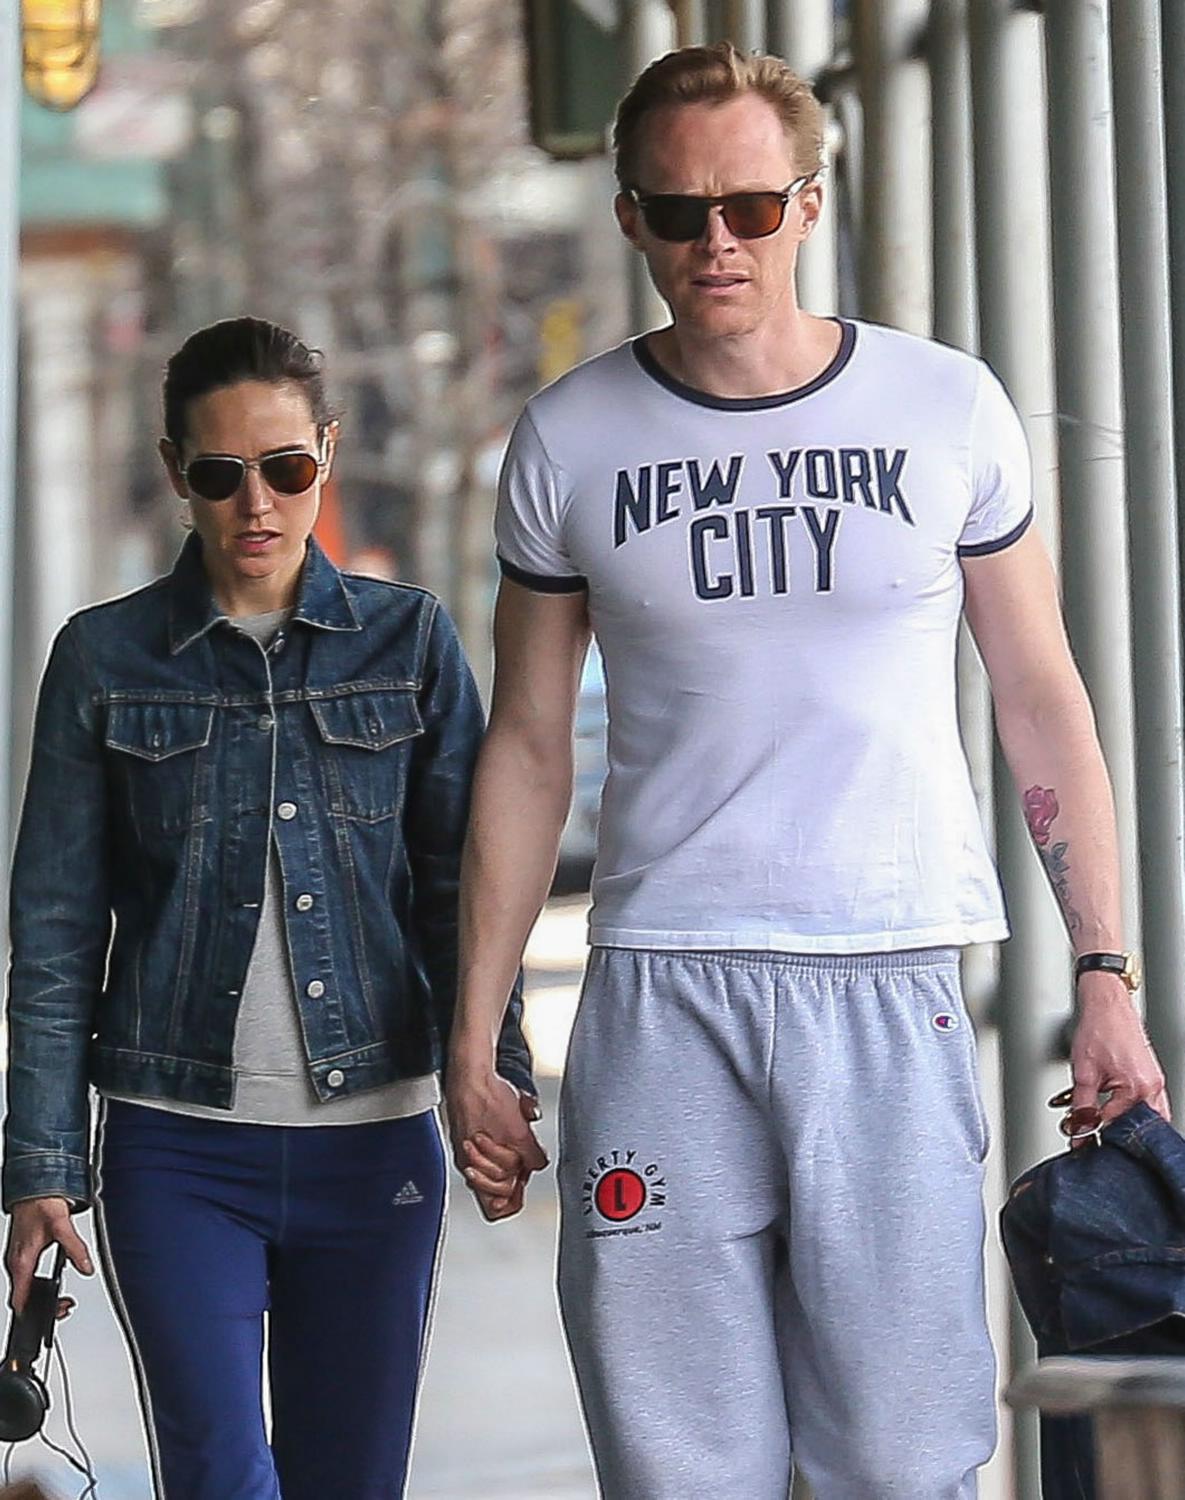 Jennifer Connelly and Paul Bettany Smile on Bike Ride in N.Y.C.: Photo